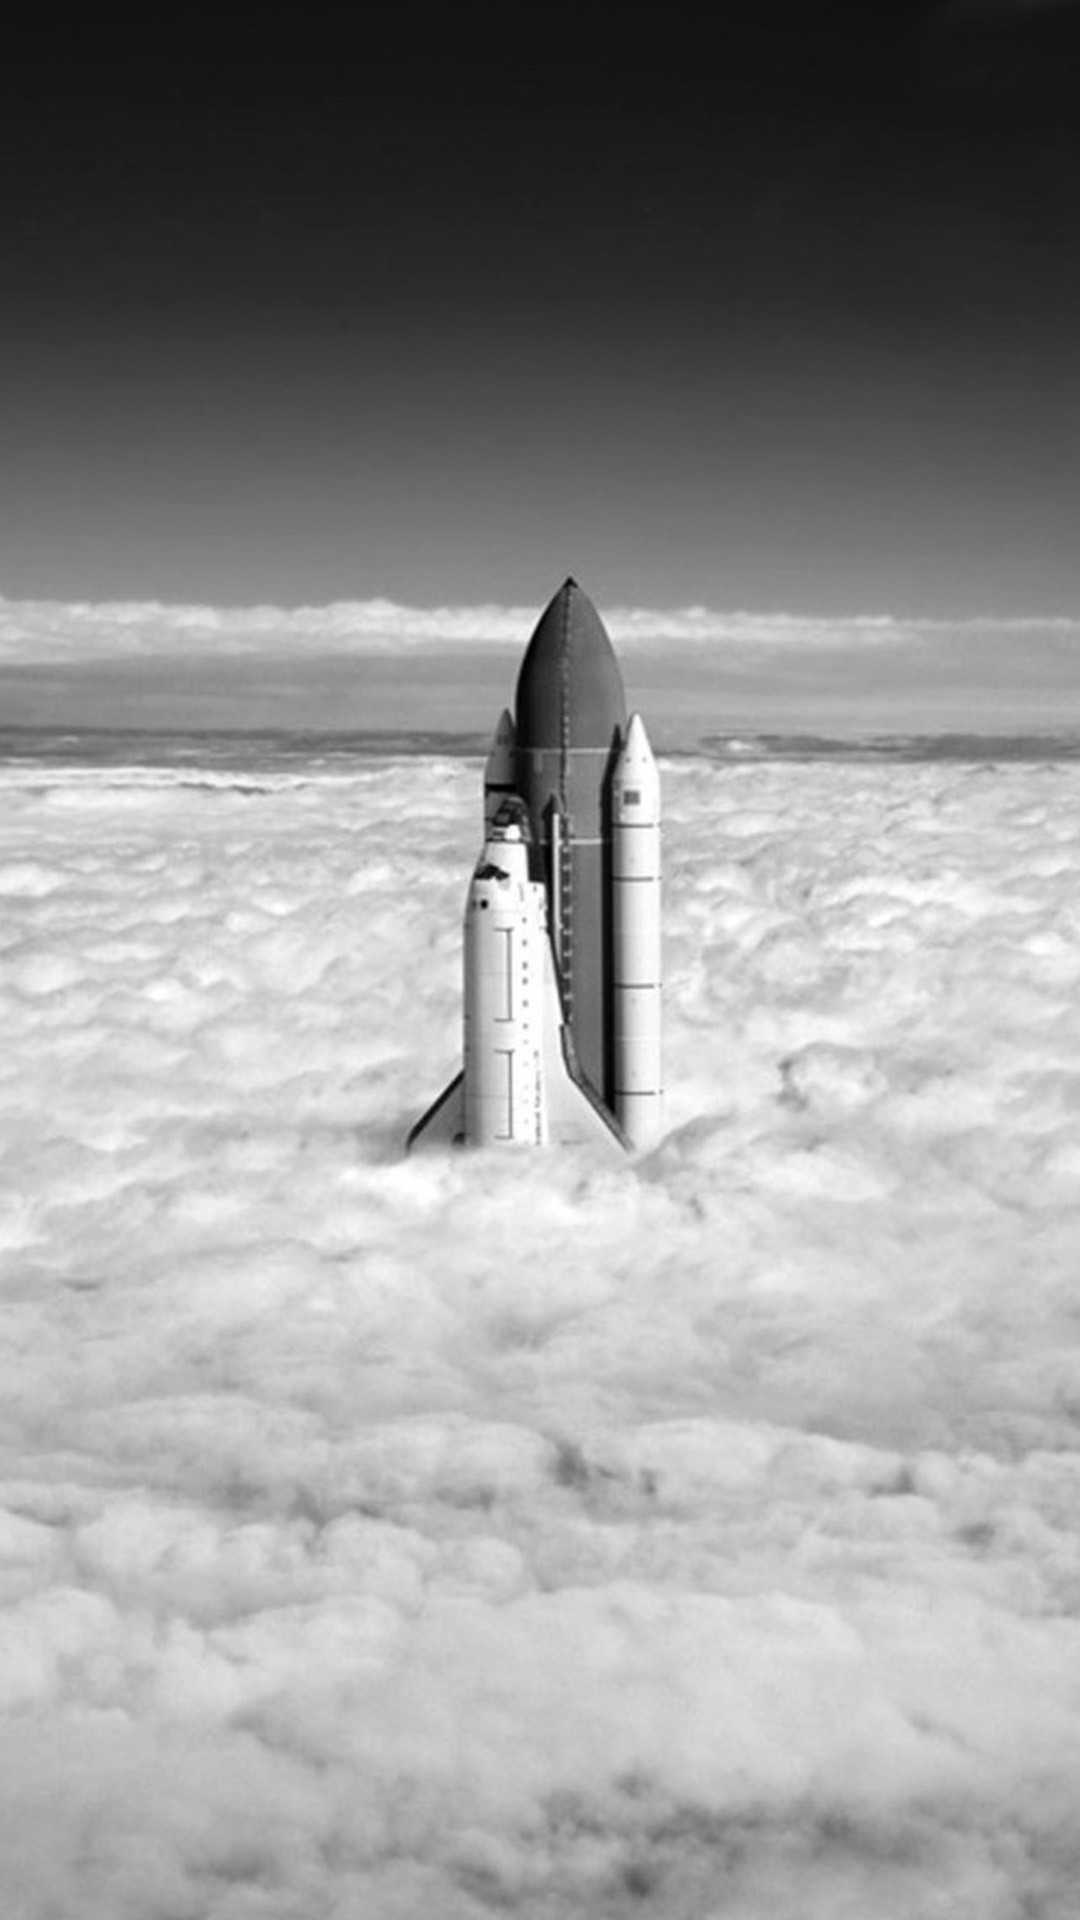 Grayscale Rocket Up Towards Cloudy SKy #iPhone #plus #wallpaper